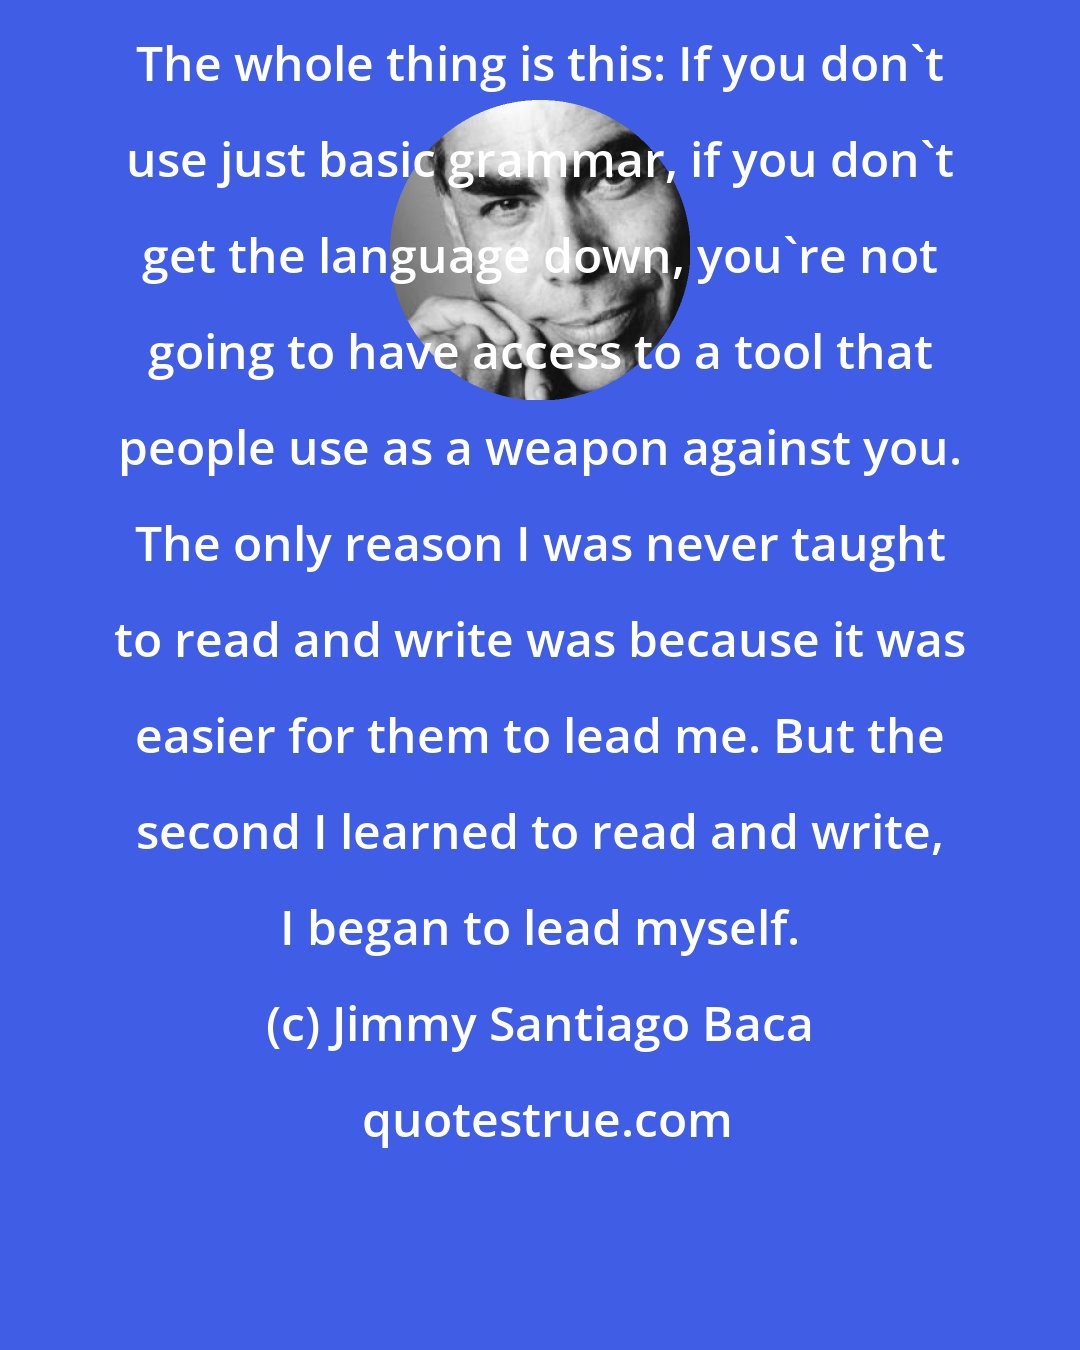 Jimmy Santiago Baca: The whole thing is this: If you don't use just basic grammar, if you don't get the language down, you're not going to have access to a tool that people use as a weapon against you. The only reason I was never taught to read and write was because it was easier for them to lead me. But the second I learned to read and write, I began to lead myself.